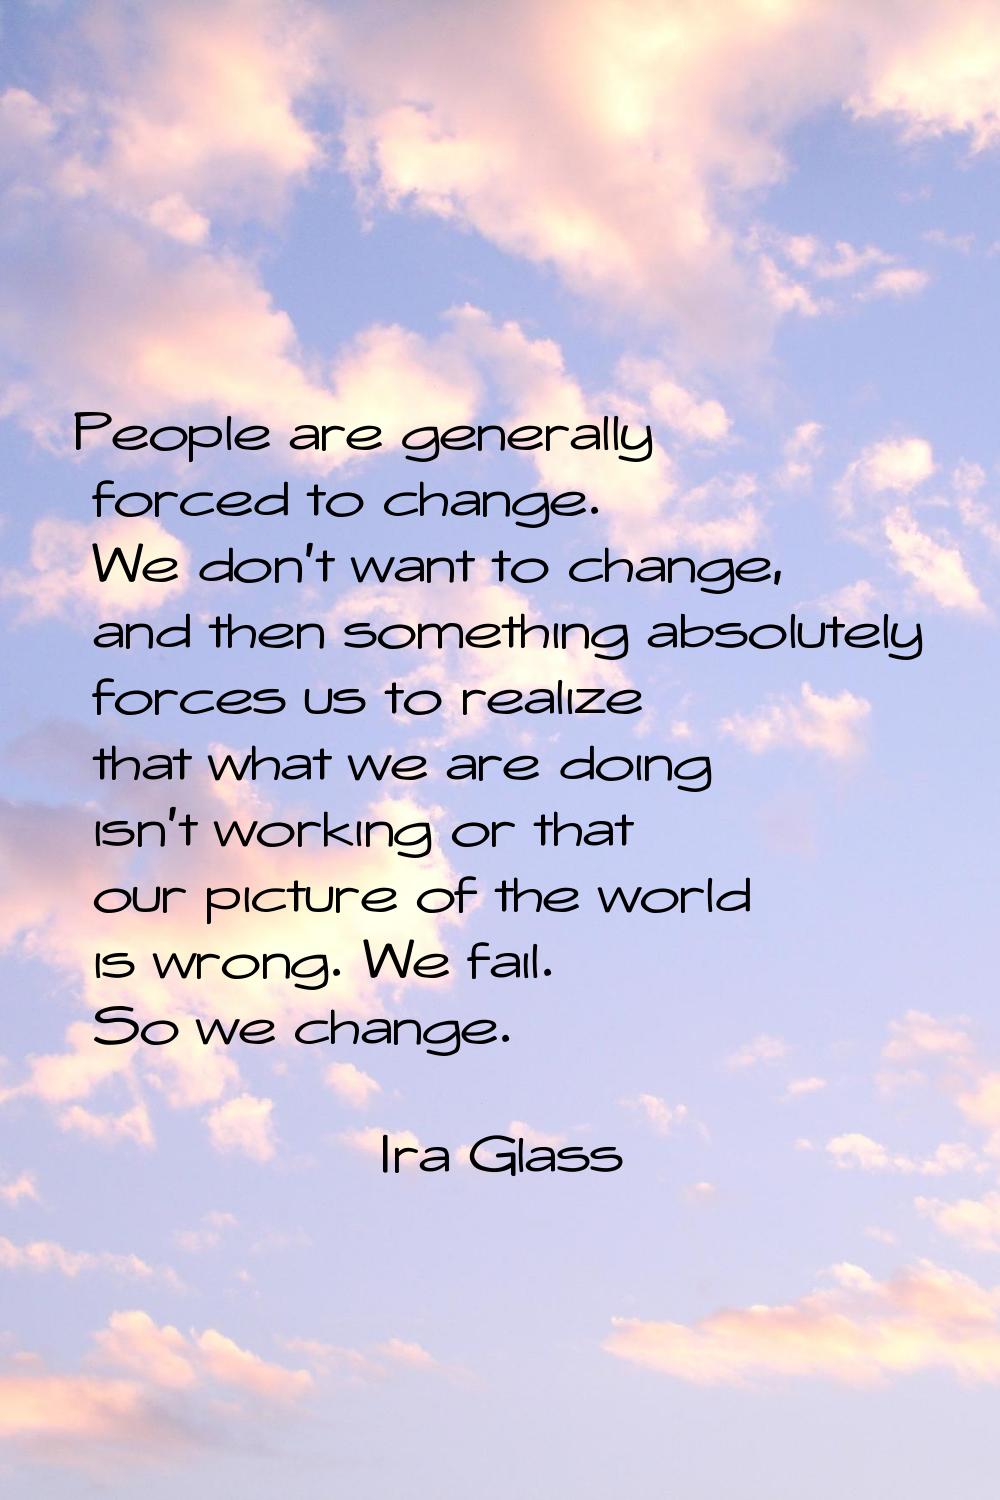 People are generally forced to change. We don't want to change, and then something absolutely force